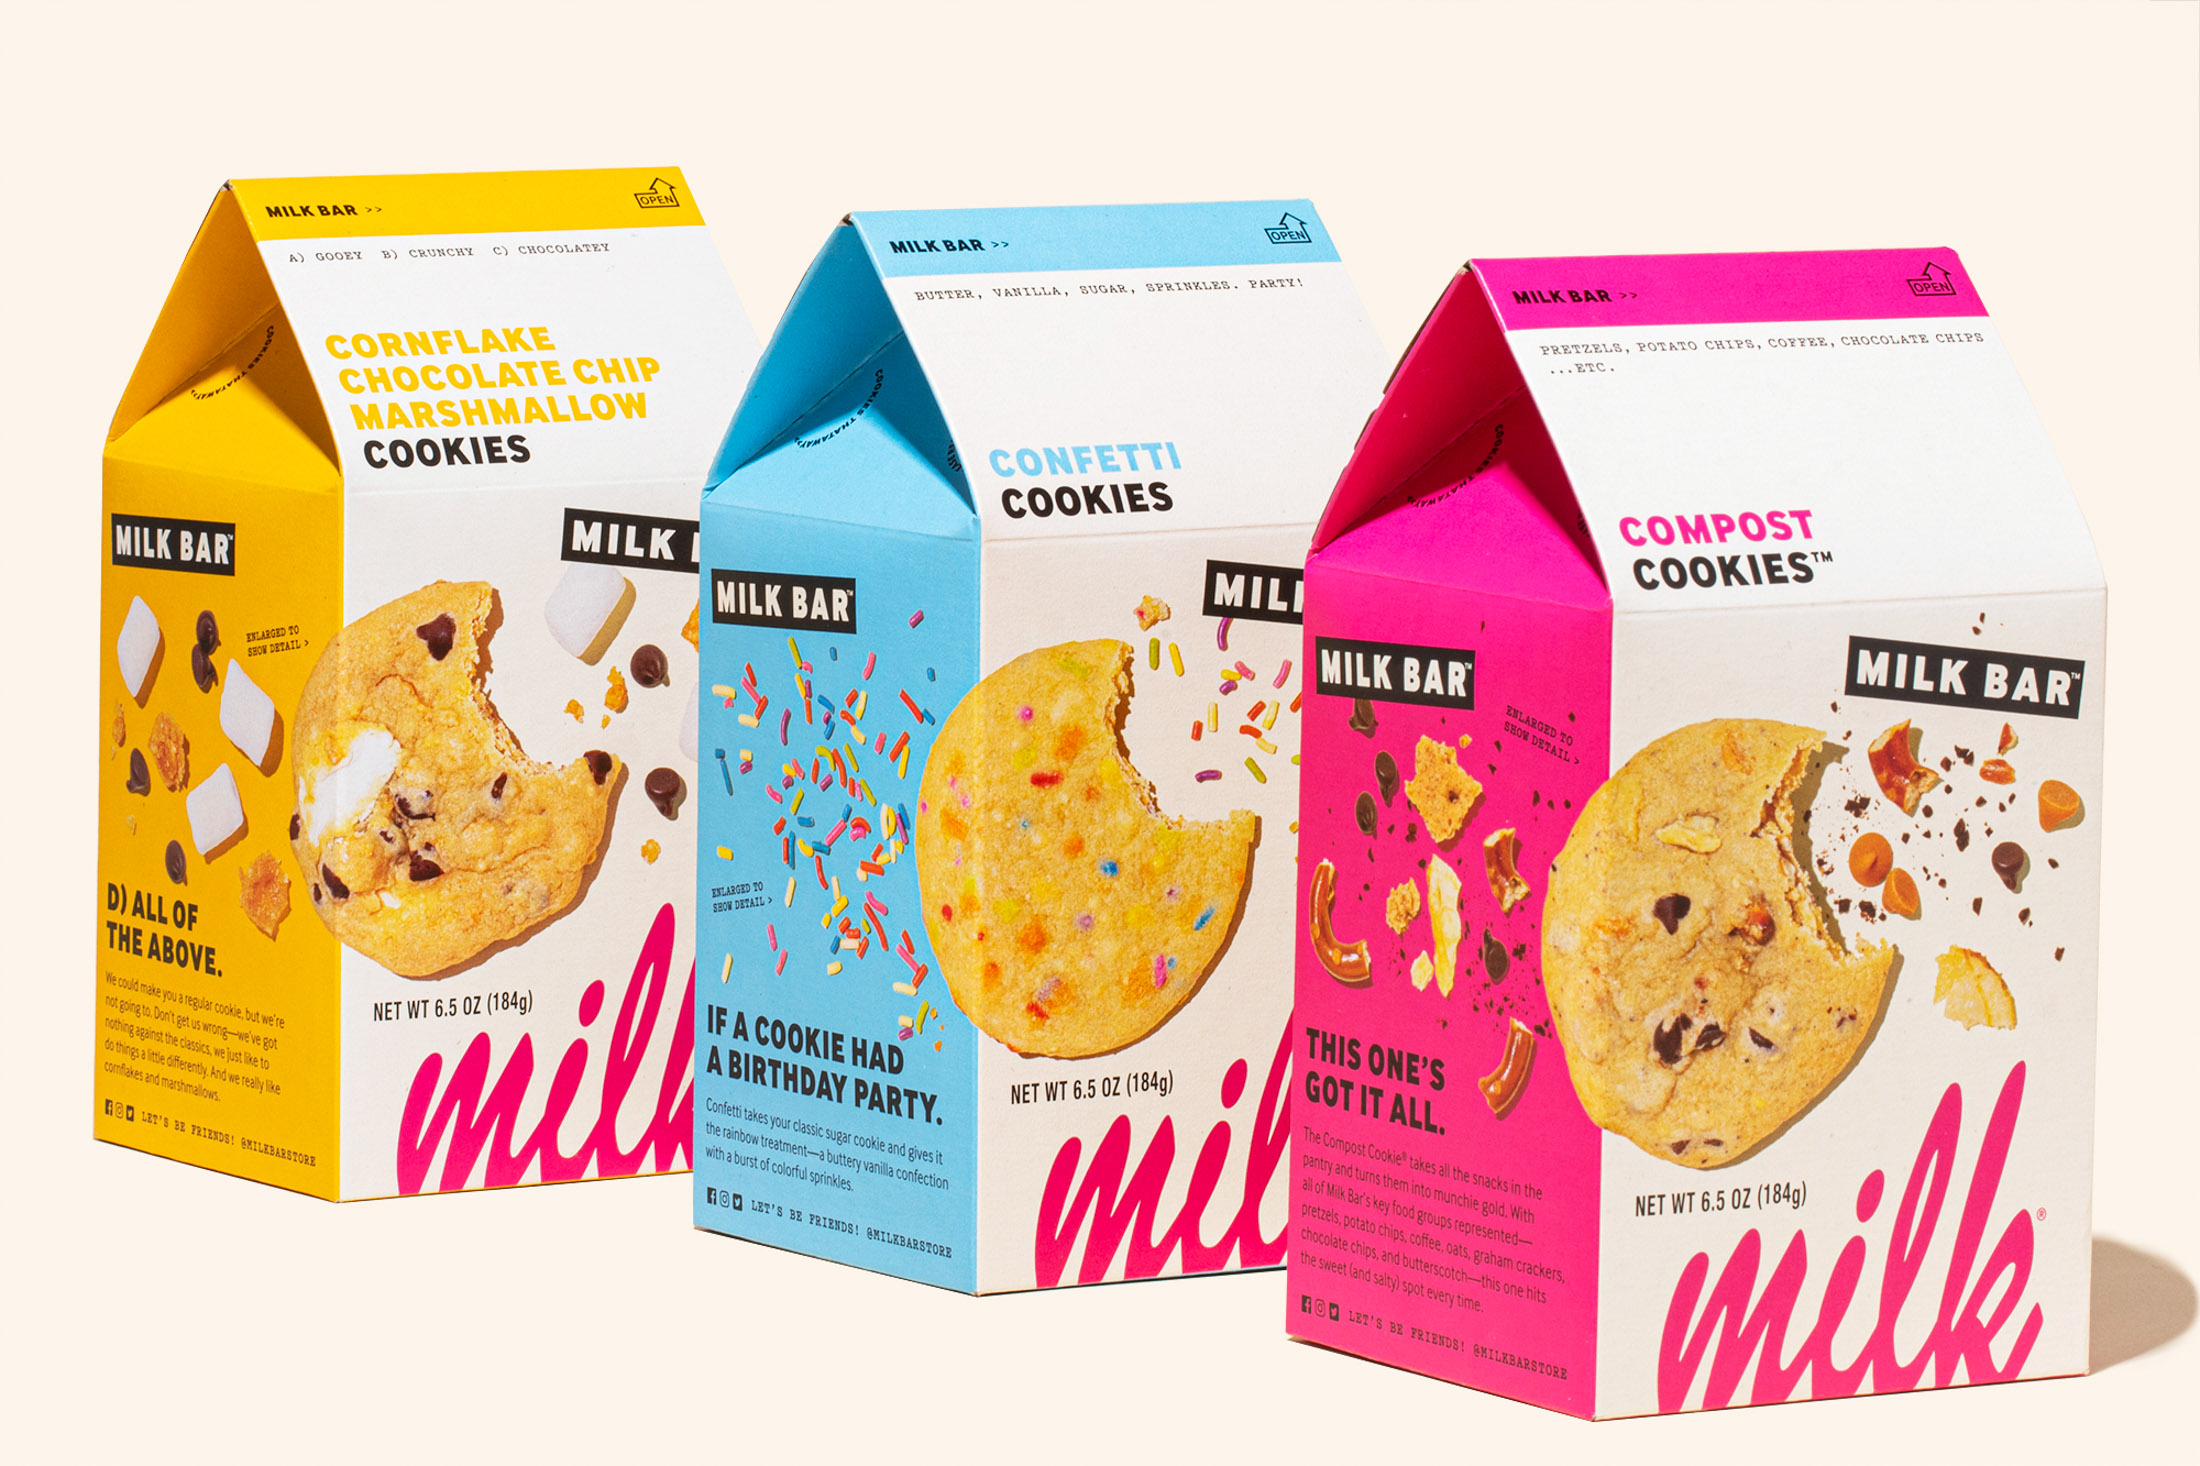 Buy Milk Bar Products at Whole Foods Market